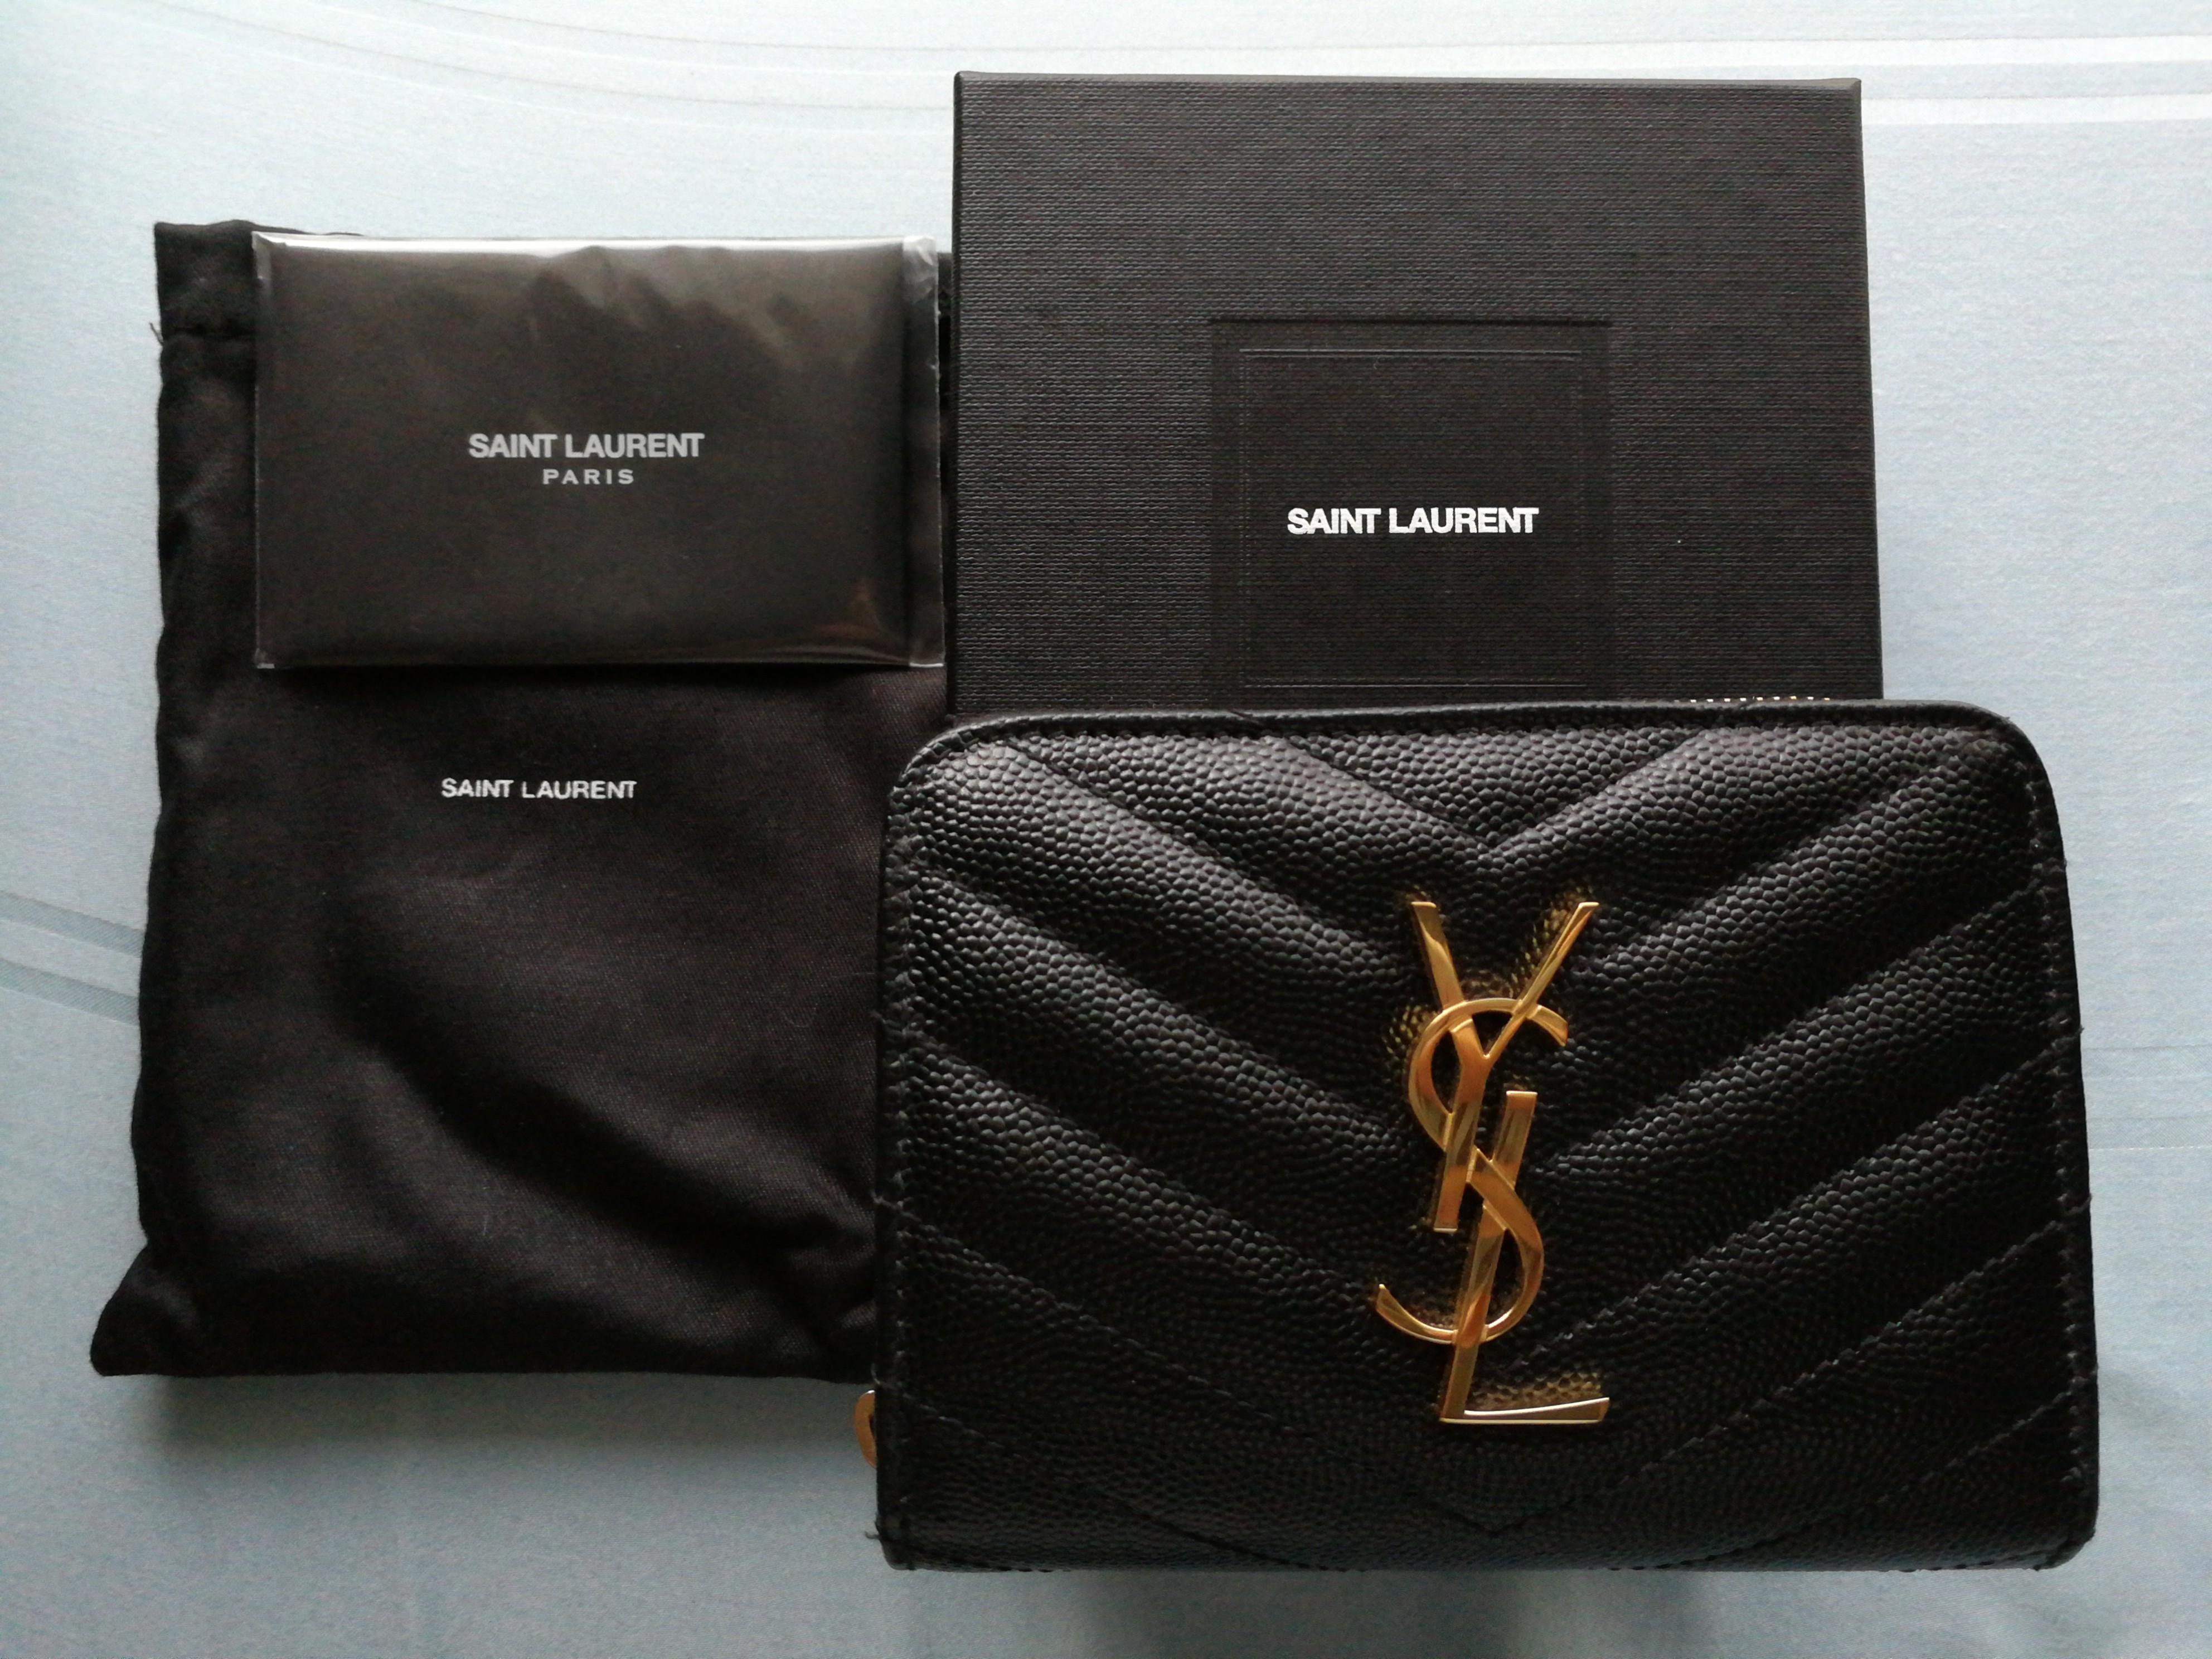 FAVORITE SLG OF THE MOMENT - YSL Croc Embossed Compact Wallet 